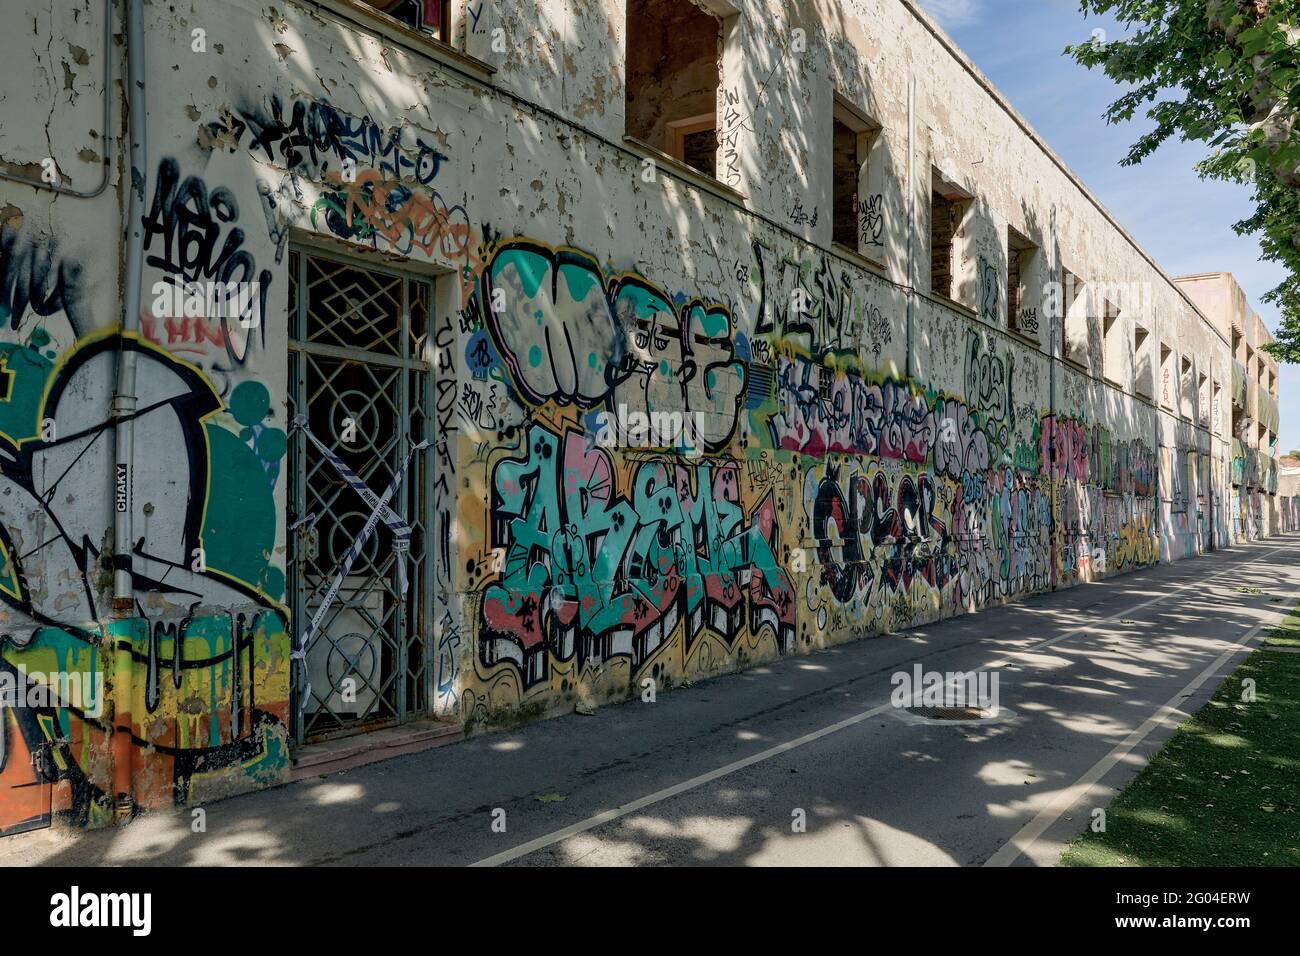 paintings, graffiti drawings on the wall of an abandoned building in the town of Benicarlo in the province of Castellon, Spain, Europe Stock Photo